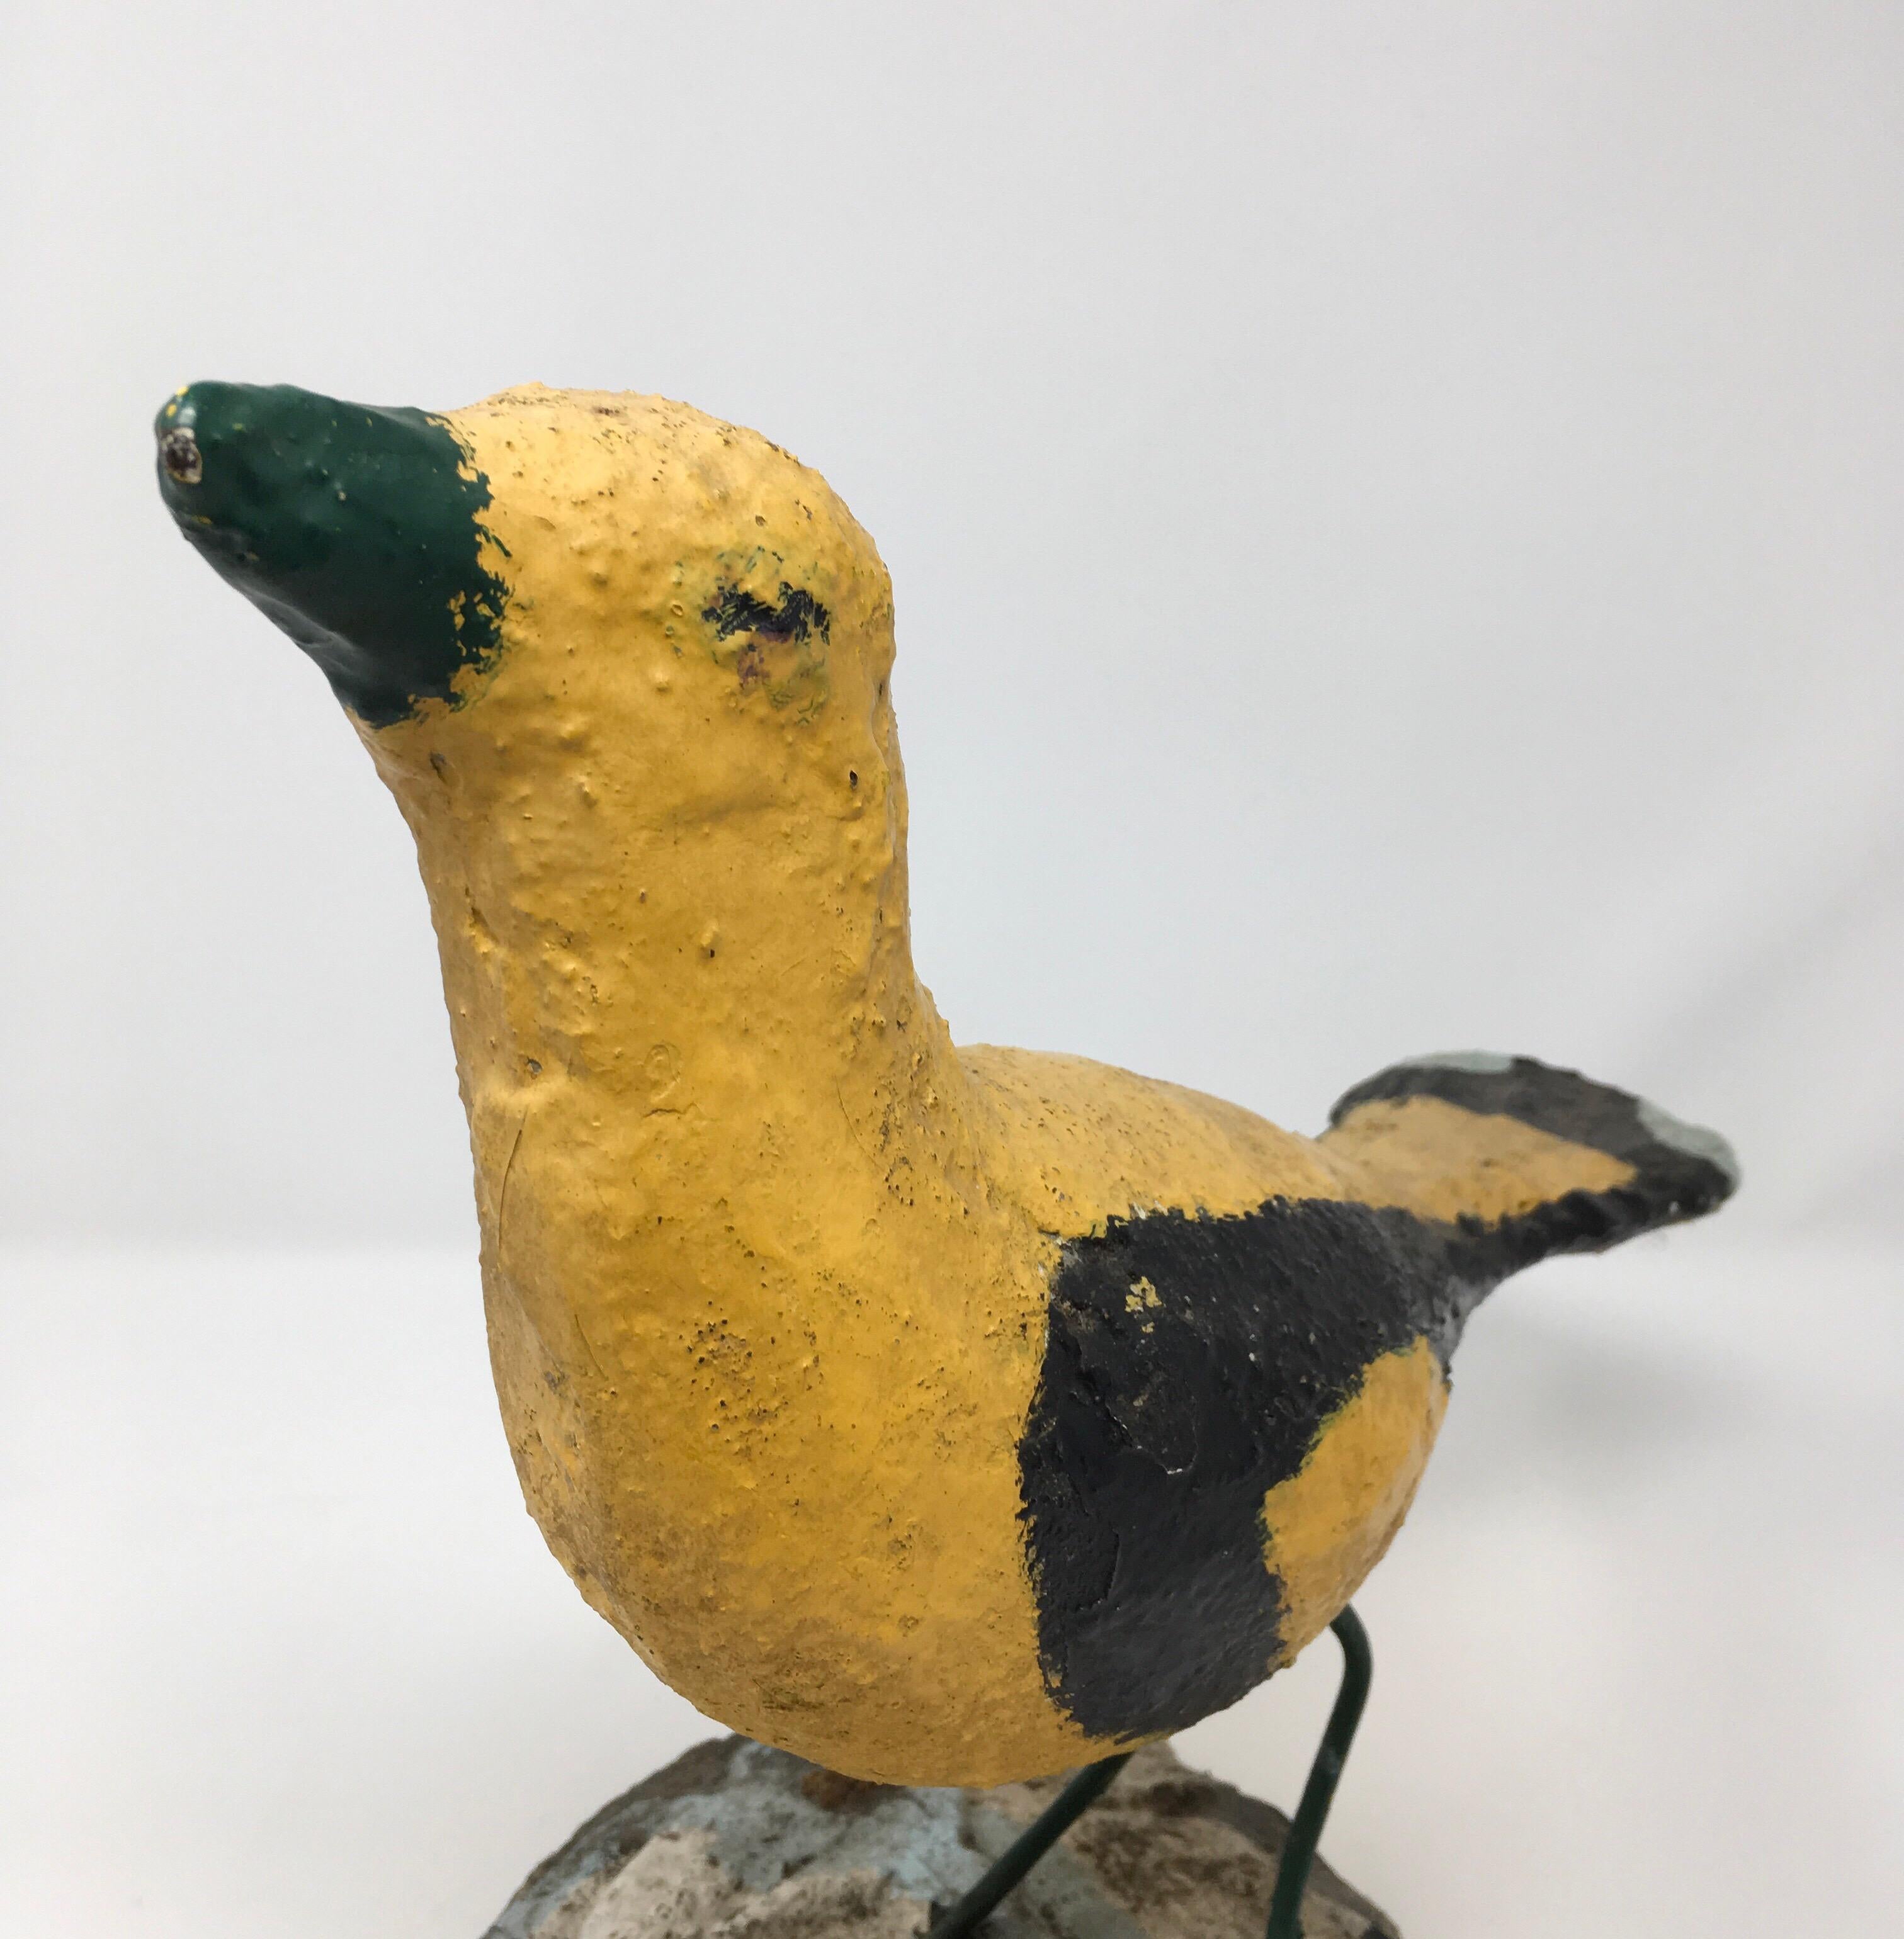 Found in England, this handmade concrete bird will add whimsy and joy to any setting. When found we were told 